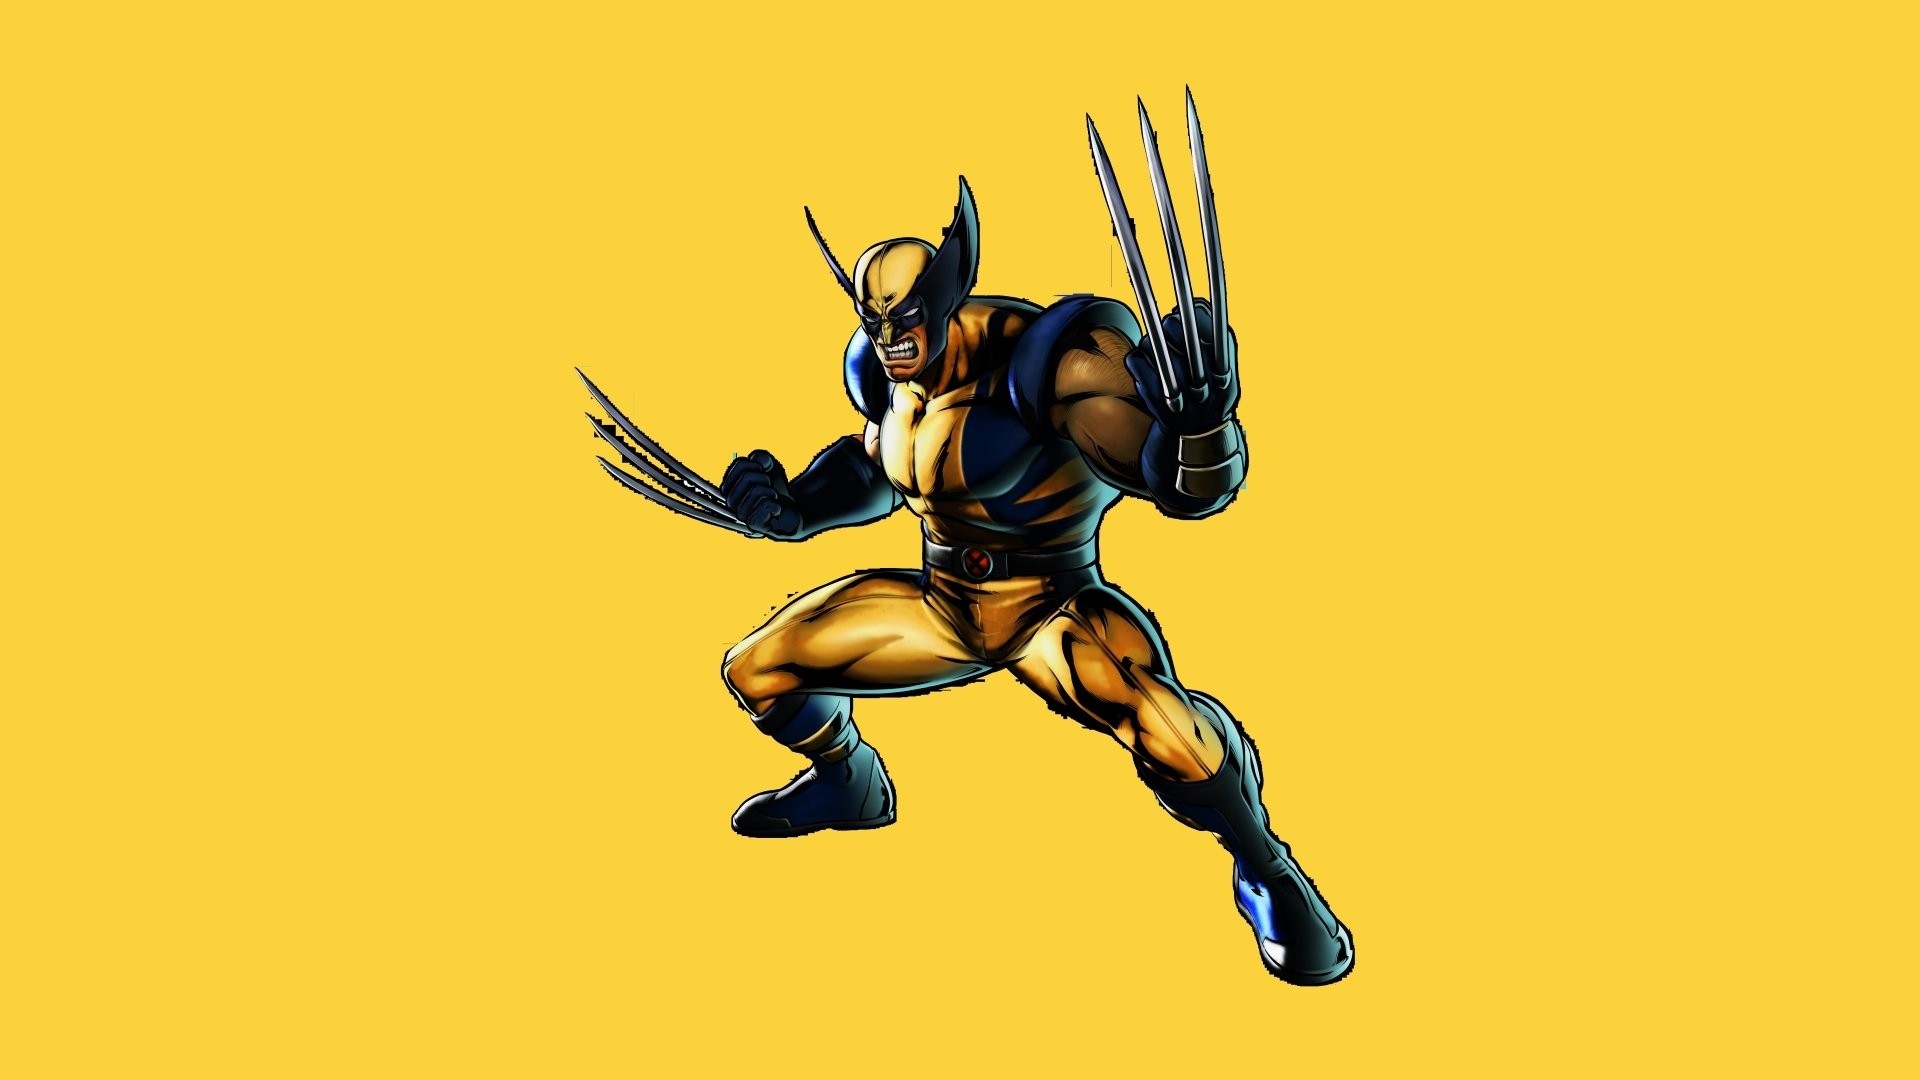 Cool Wolverine Wallpapers